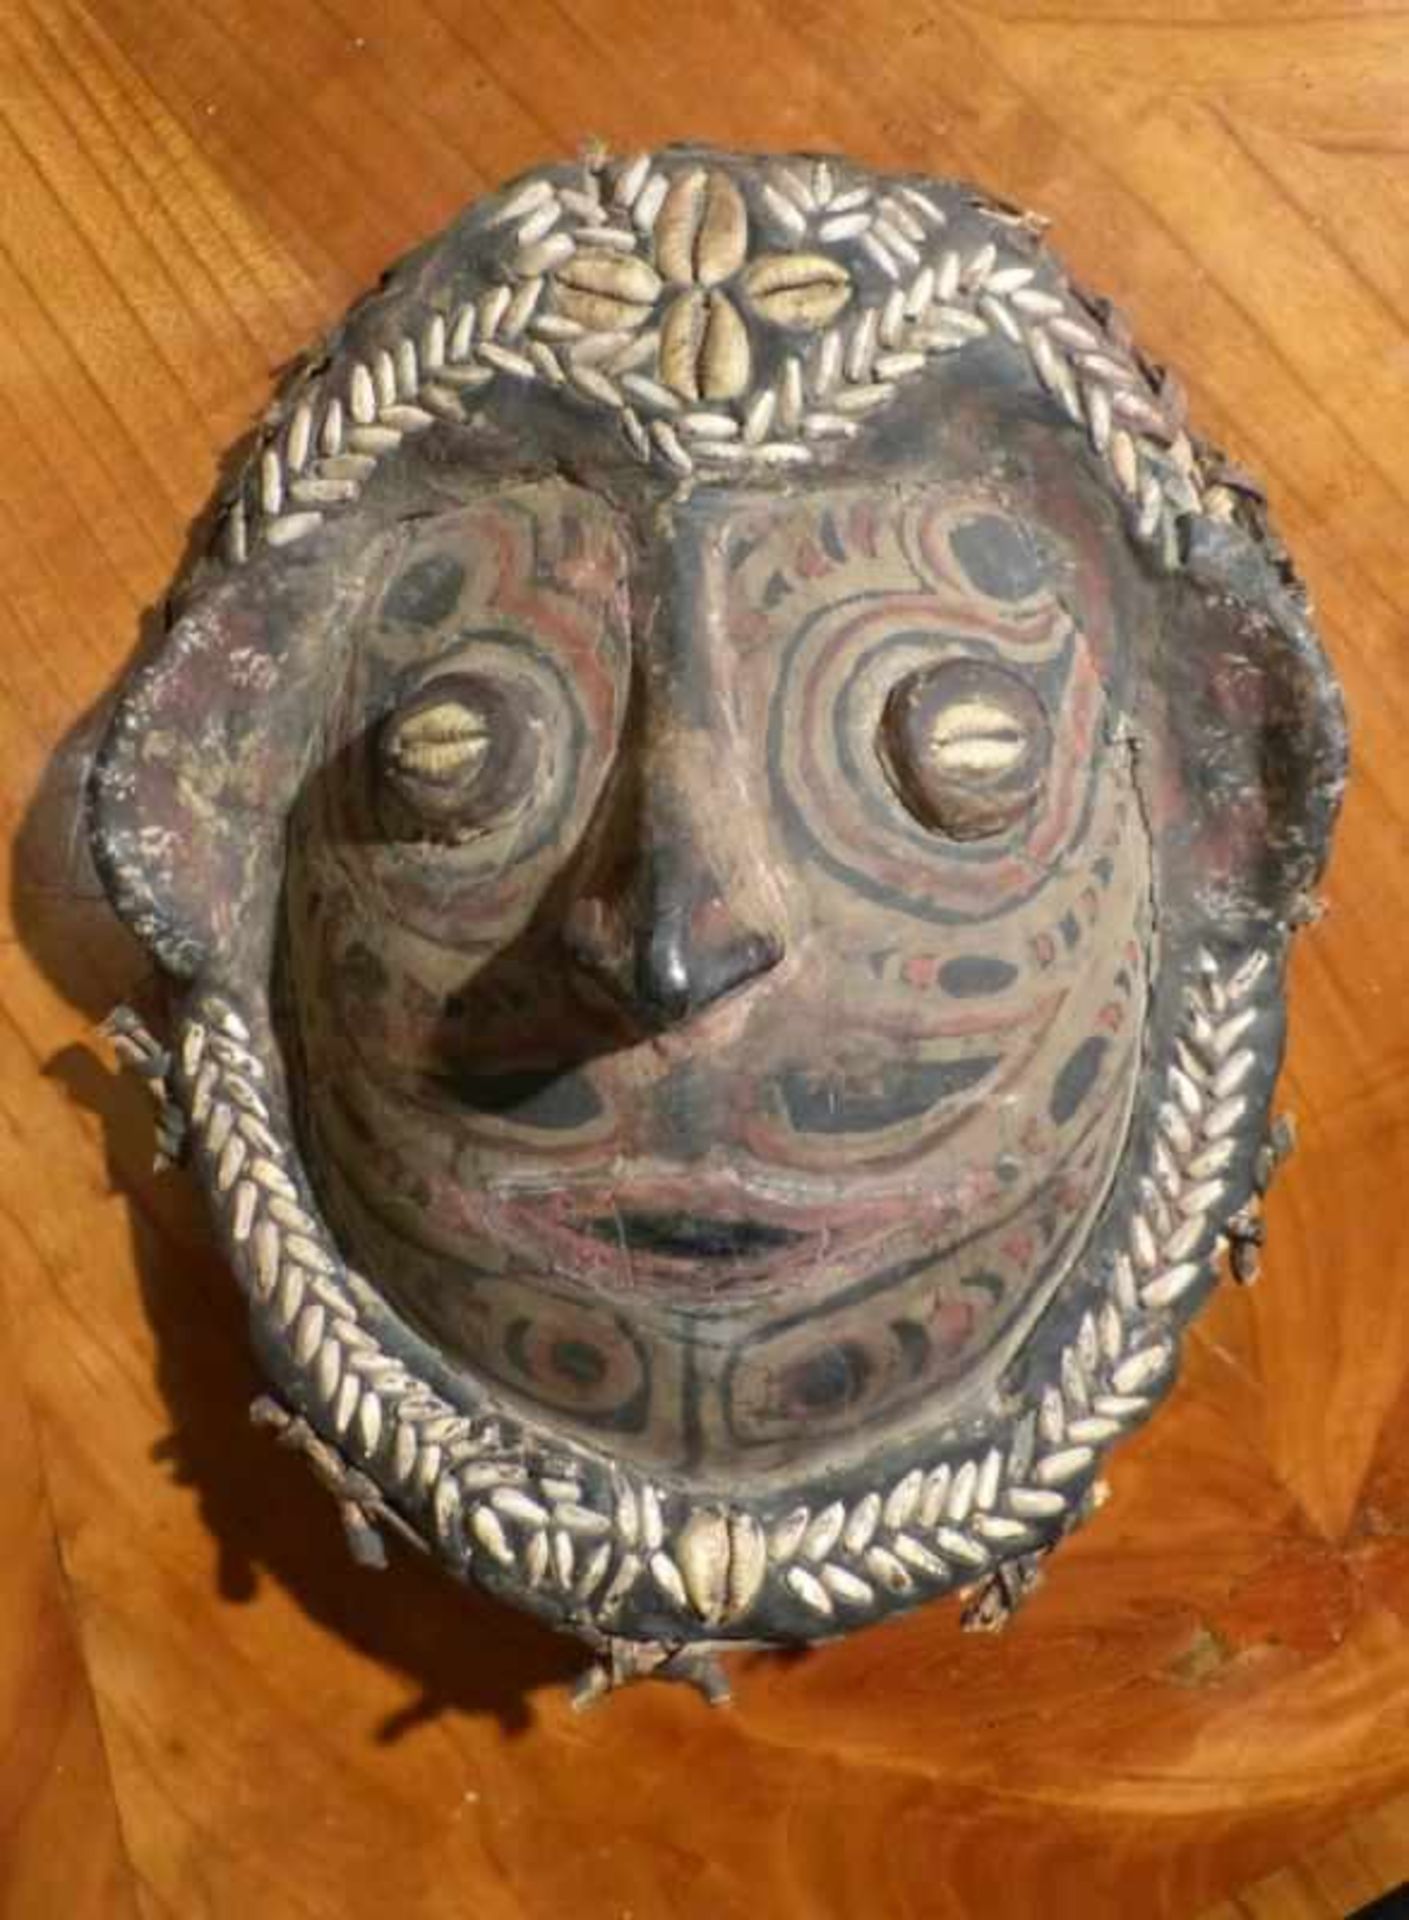 Rare Ritual MaskPapua New Guinea, Middle Sepik RiverTortoise shell, overmodeled with clay and